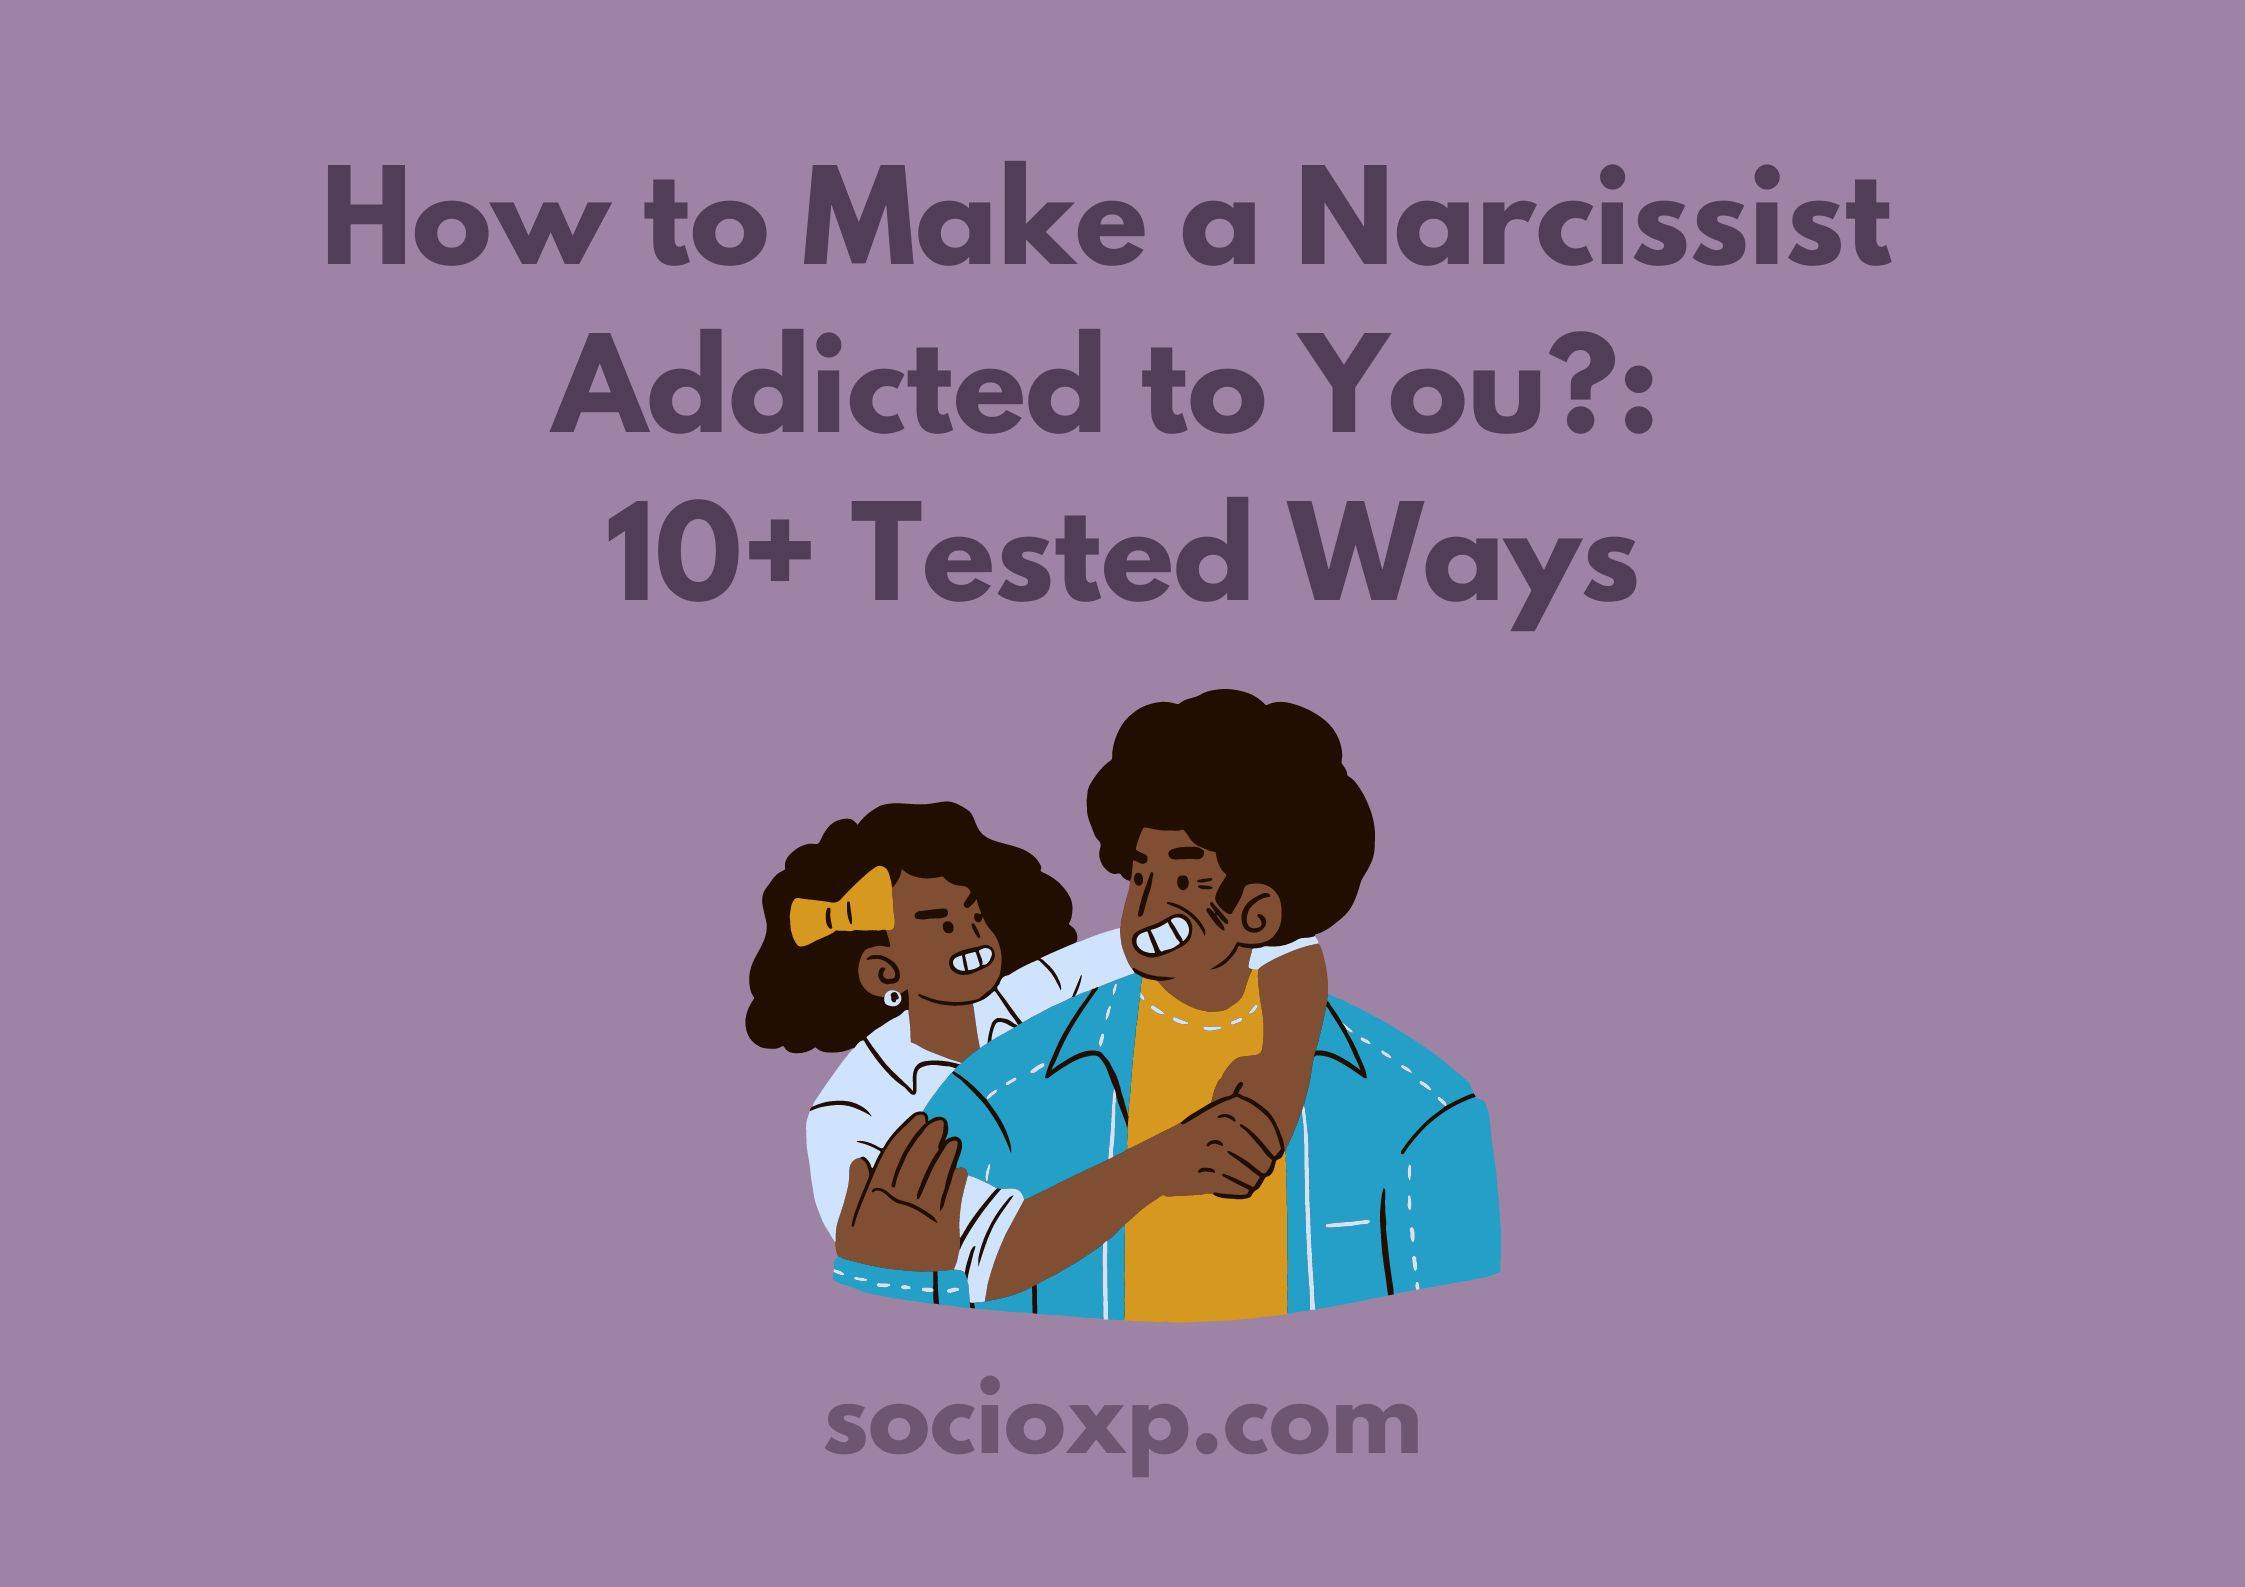 How to Make a Narcissist Addicted to You?: 10+ Tested Ways